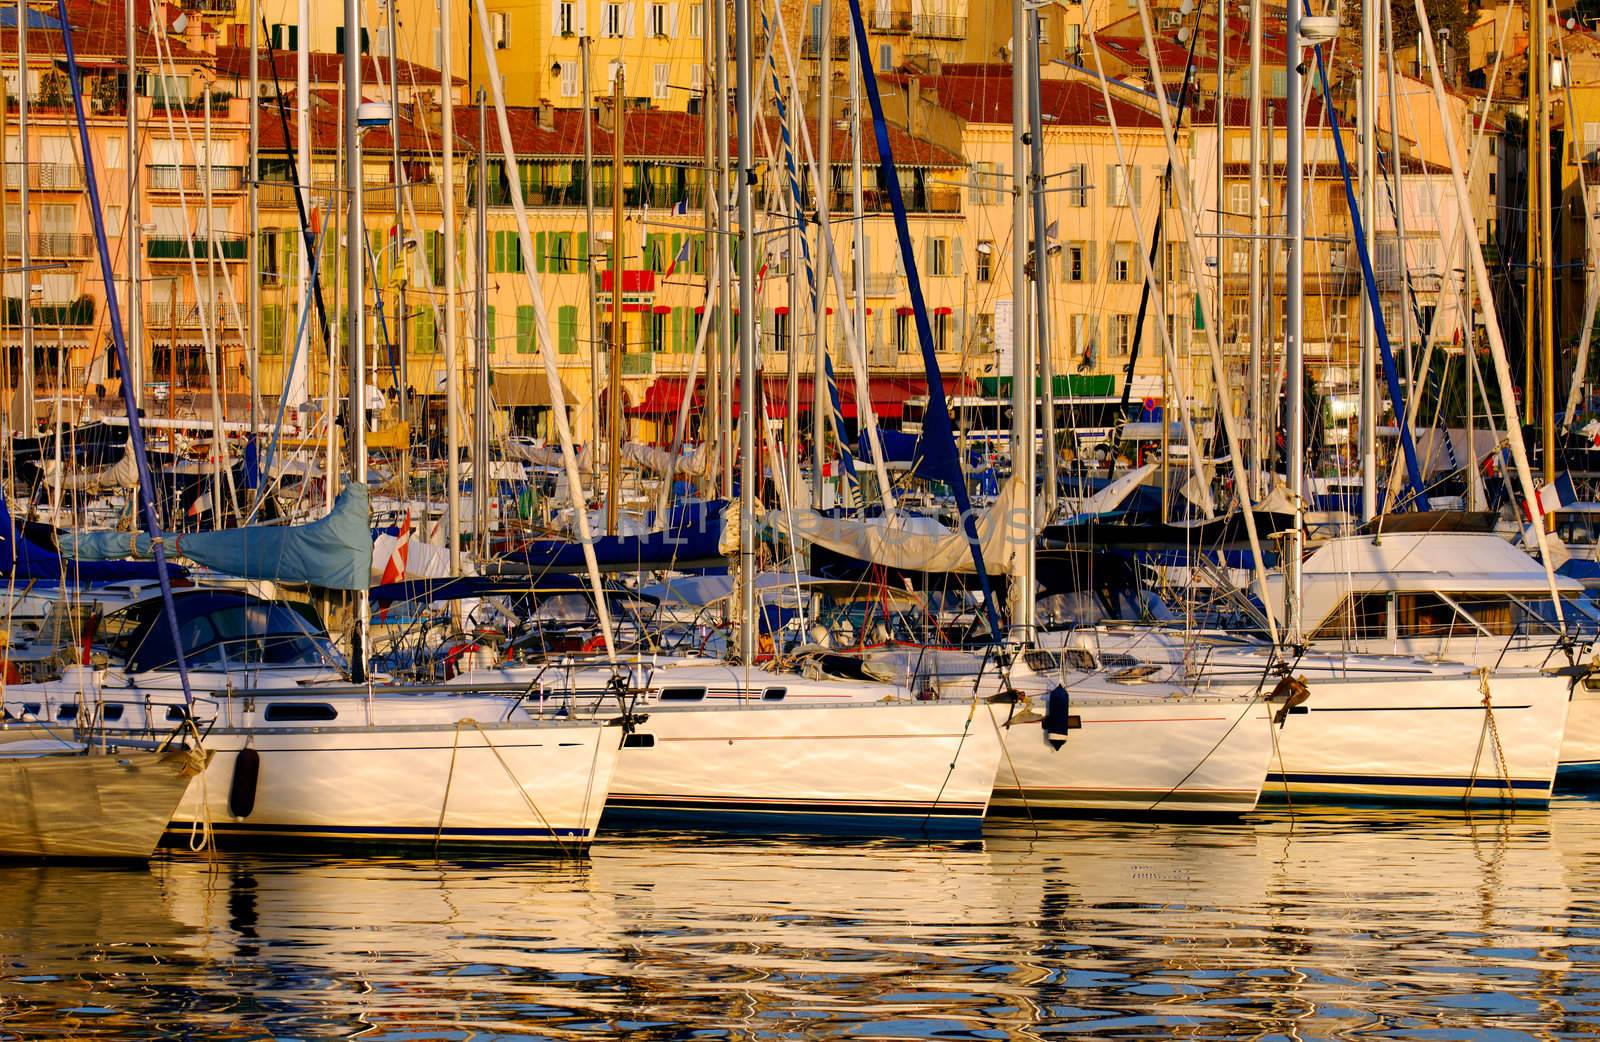 Vieux port ( old port) in Cannes, France by akarelias